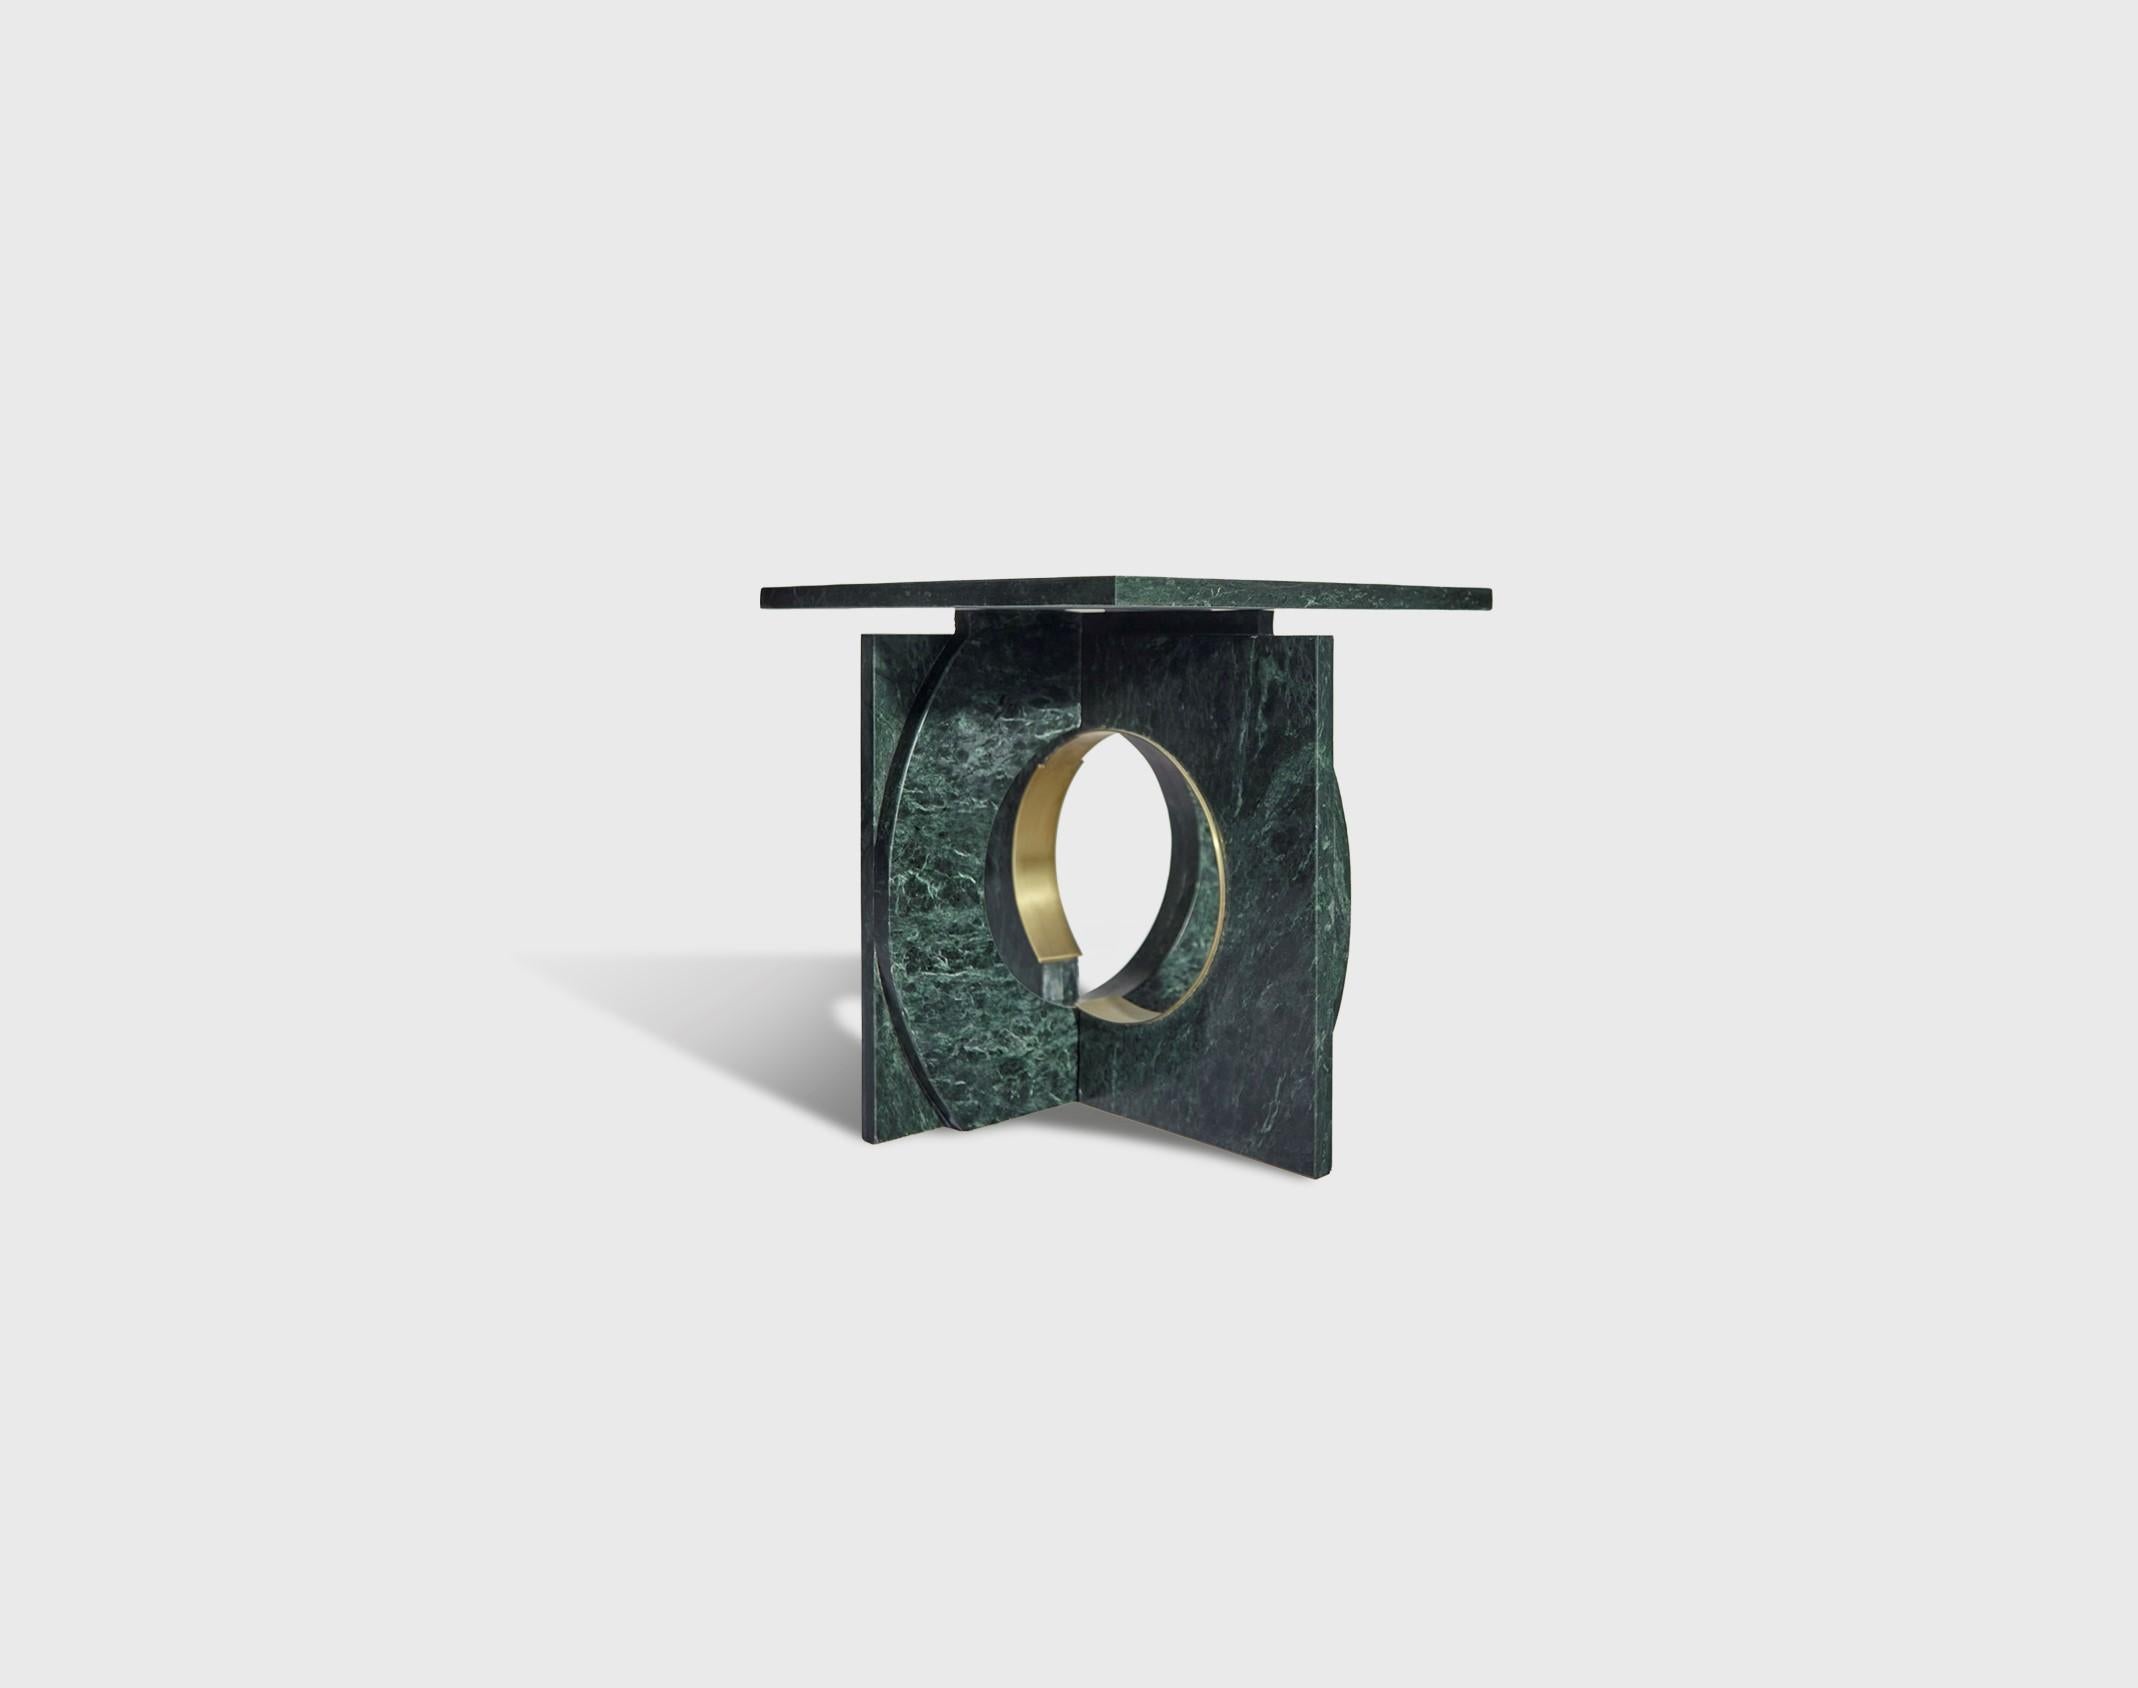 Neptuno marble side table by Atra Design
Dimensions: D 40 x W 40 x H 42 cm
Materials: Tikal Green marble, brass ring.
Other marbles and size available.

Atra Design
We are Atra, a furniture brand produced by Atra form a mexico city–based high end